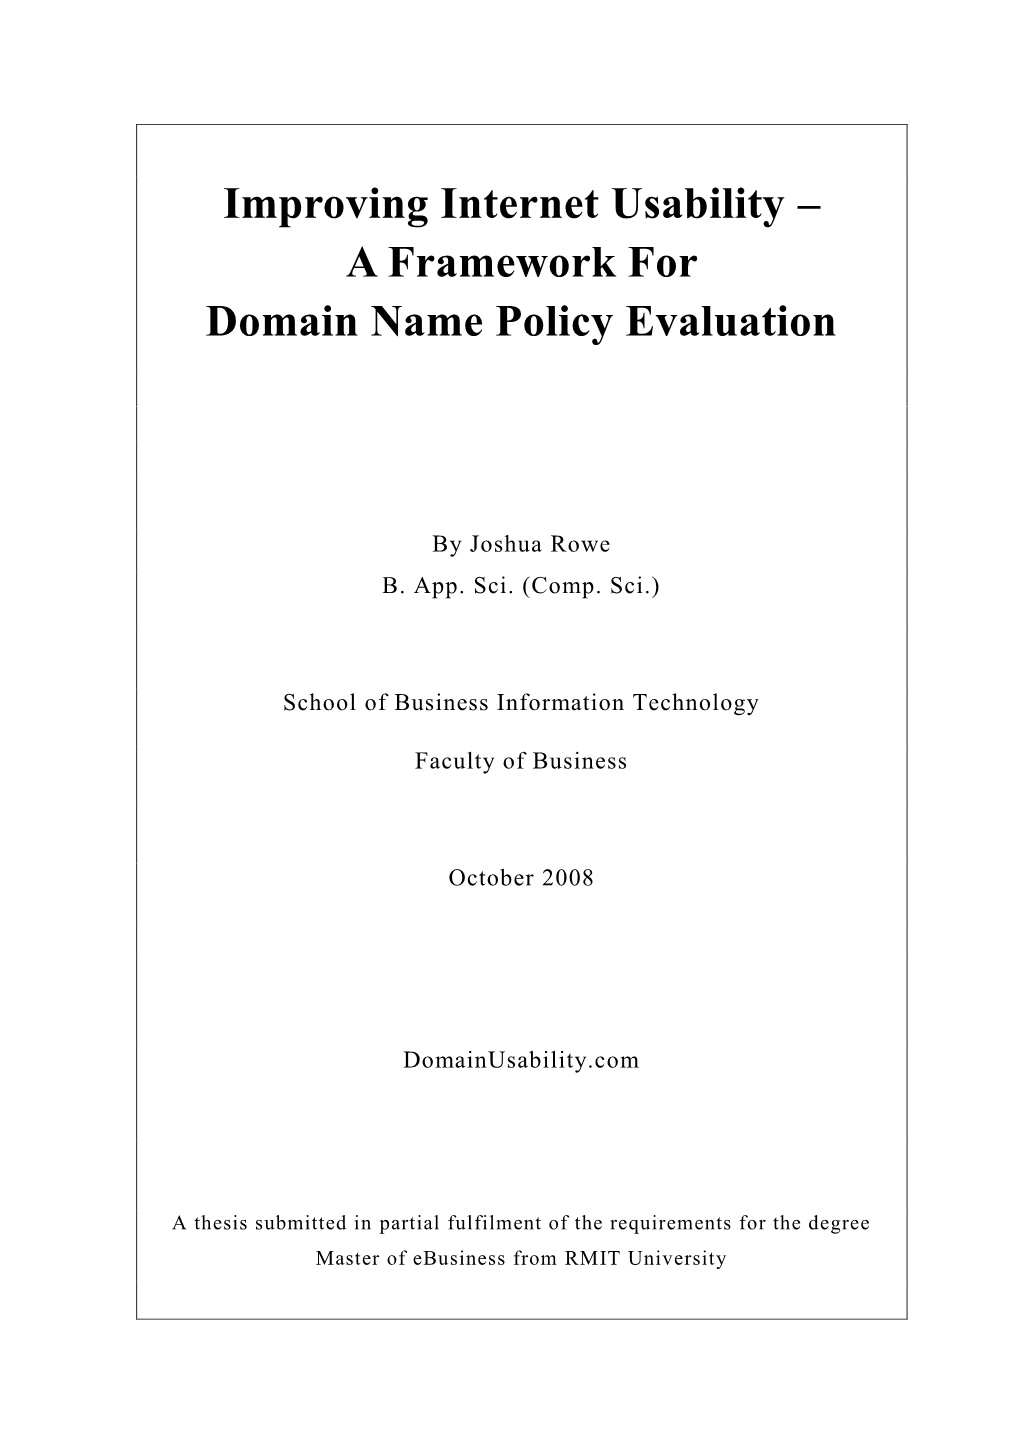 Improving Internet Usability – a Framework for Domain Name Policy Evaluation